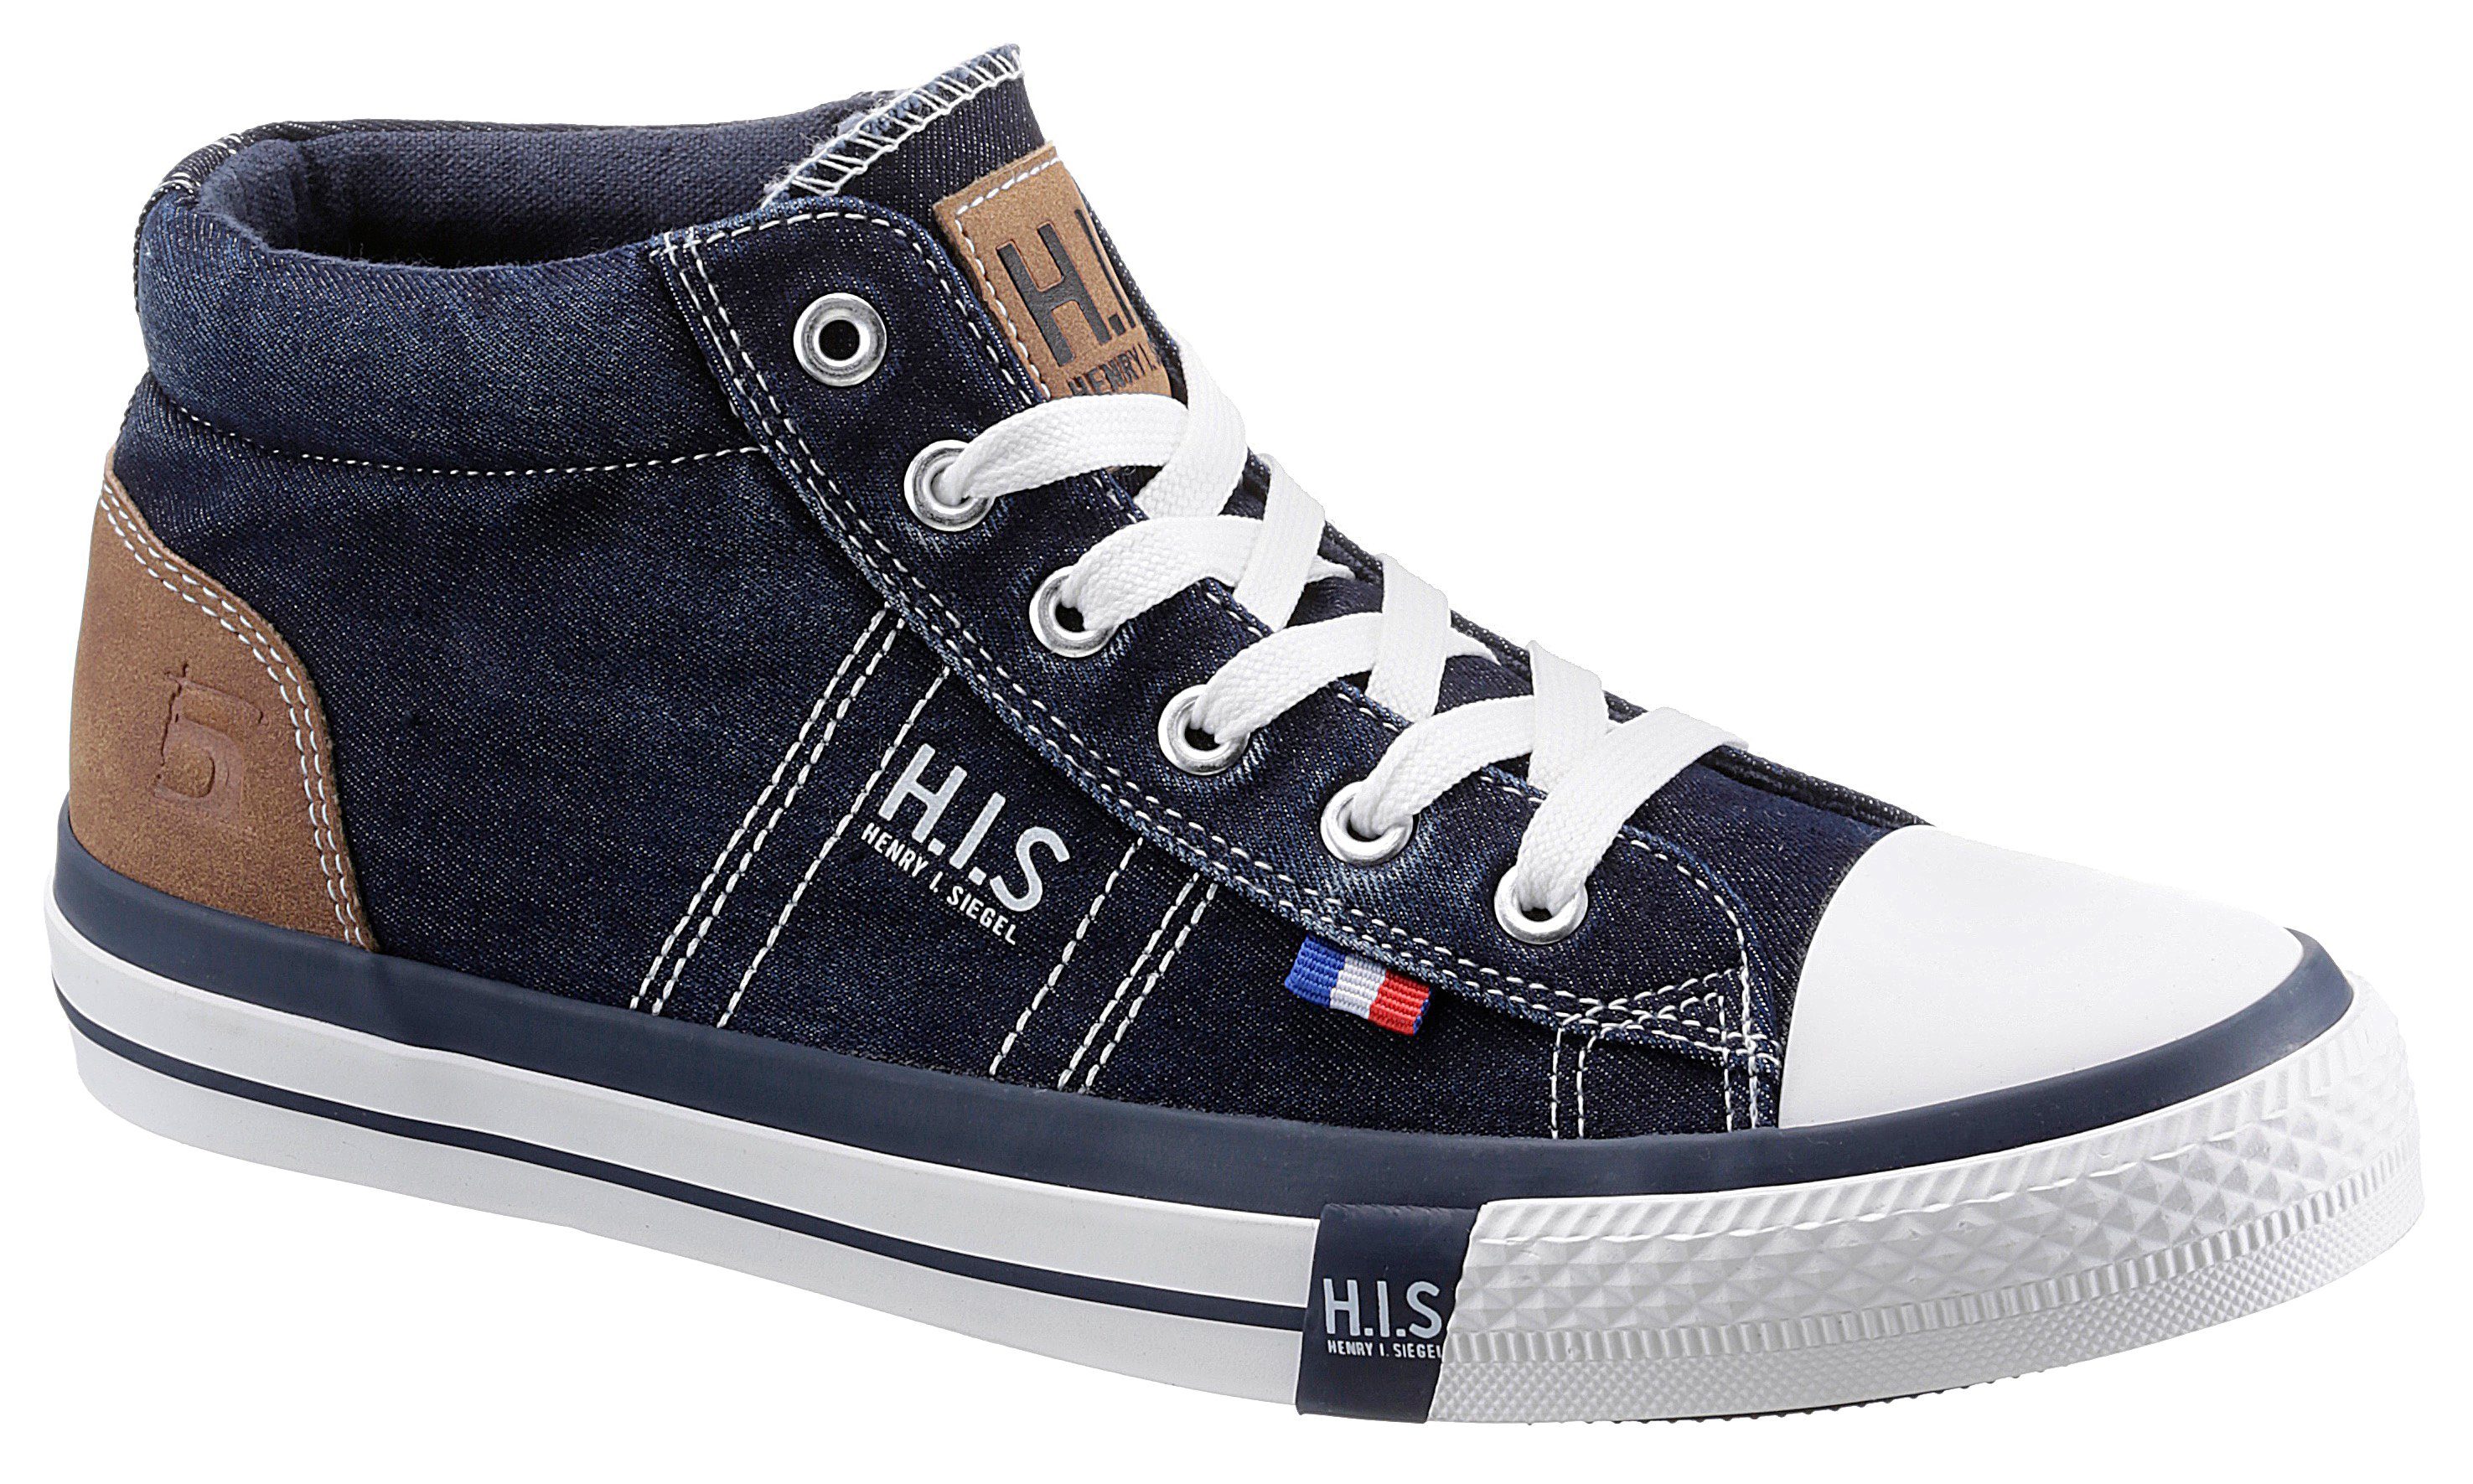 H.I.S Sneaker mit Jeans Used-Look